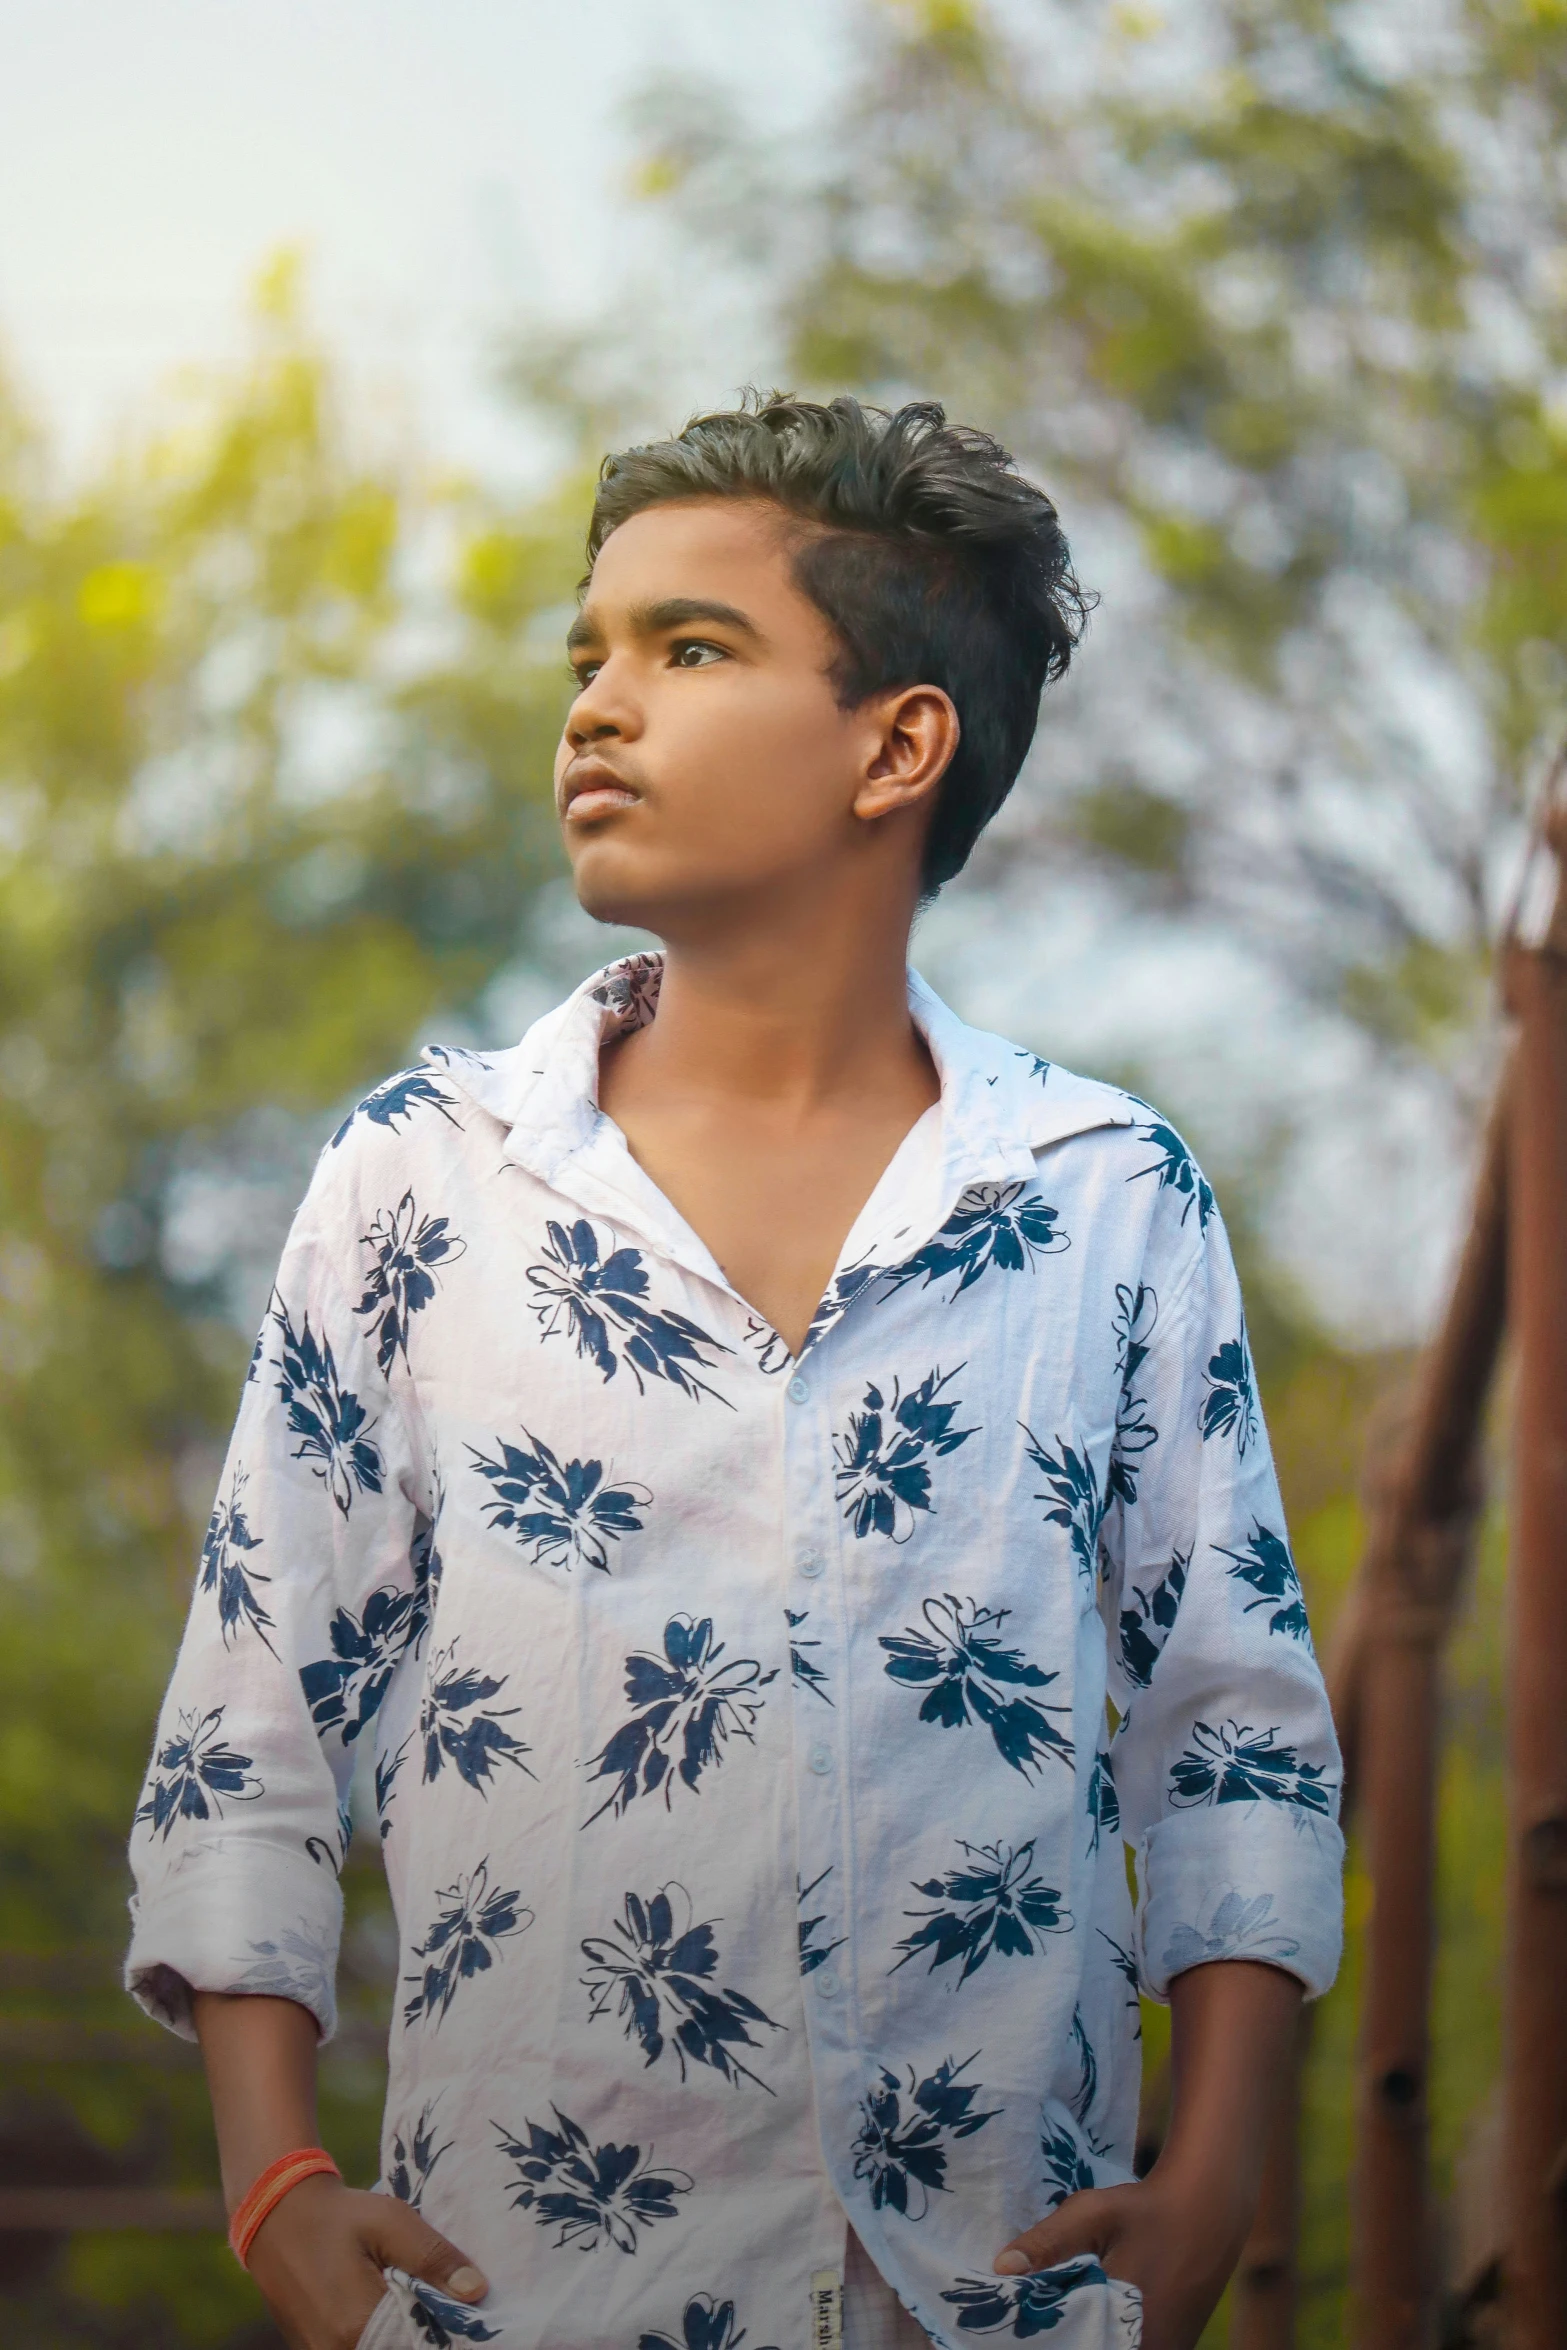 a person in a floral shirt looks away from the camera